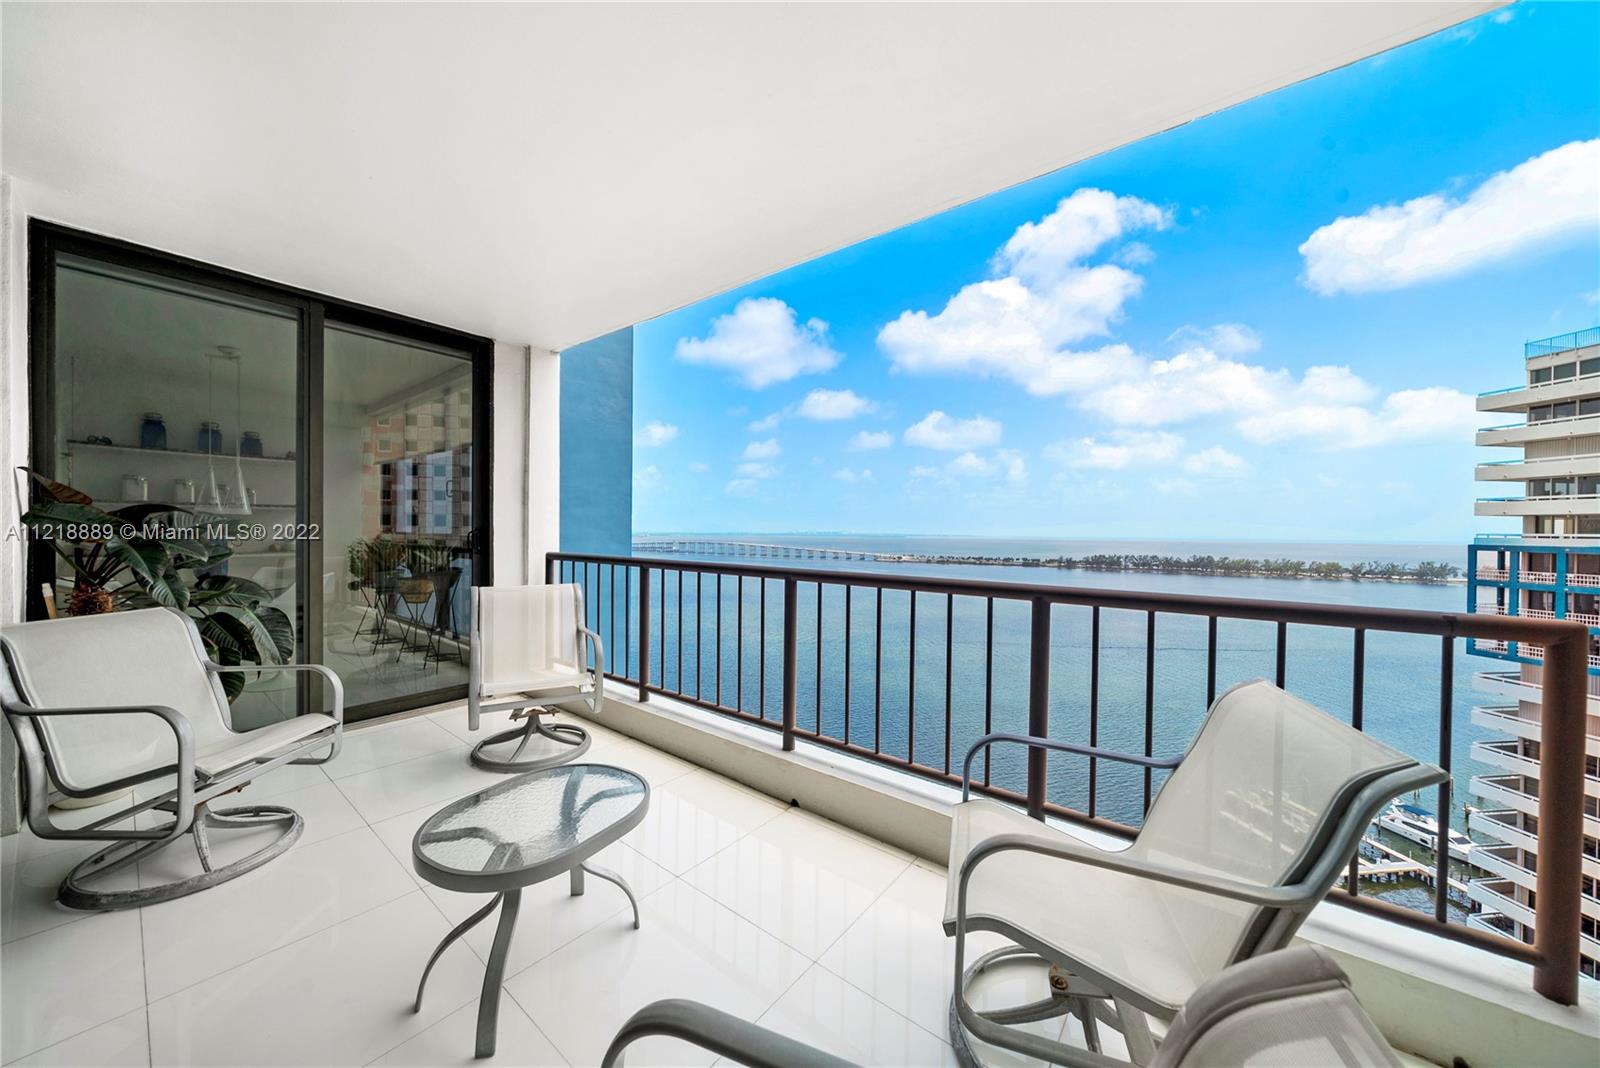 Beautiful residence at Villa Regina in Brickell, with only 3 units per floor and amazing views of Miami & the Bay! Located in the East Wing, this 2 BD / 3BA unit boasts a foyer entry with double doors, gorgeous white  glass tile floors, impact windows & doors, large living room, & separate dining room. The primary suite boasts walk-in closets, his & her bathroom, & stunning views of Brickell. Amenities include a guarded gate, 24-hour concierge & security, pool & Jacuzzi, BBQ area, fully equipped gym w/ sauna & steam room, extra-large party room, & children's playroom—walking distance to Publix, Brickell City Center, Mary Brickell, Metrorail, and St Jude Church. Near Bayside shops, MTX Arena, Adrienne Arsht Performing Arts, Perez & Frost Museums. Boat Slips Available.